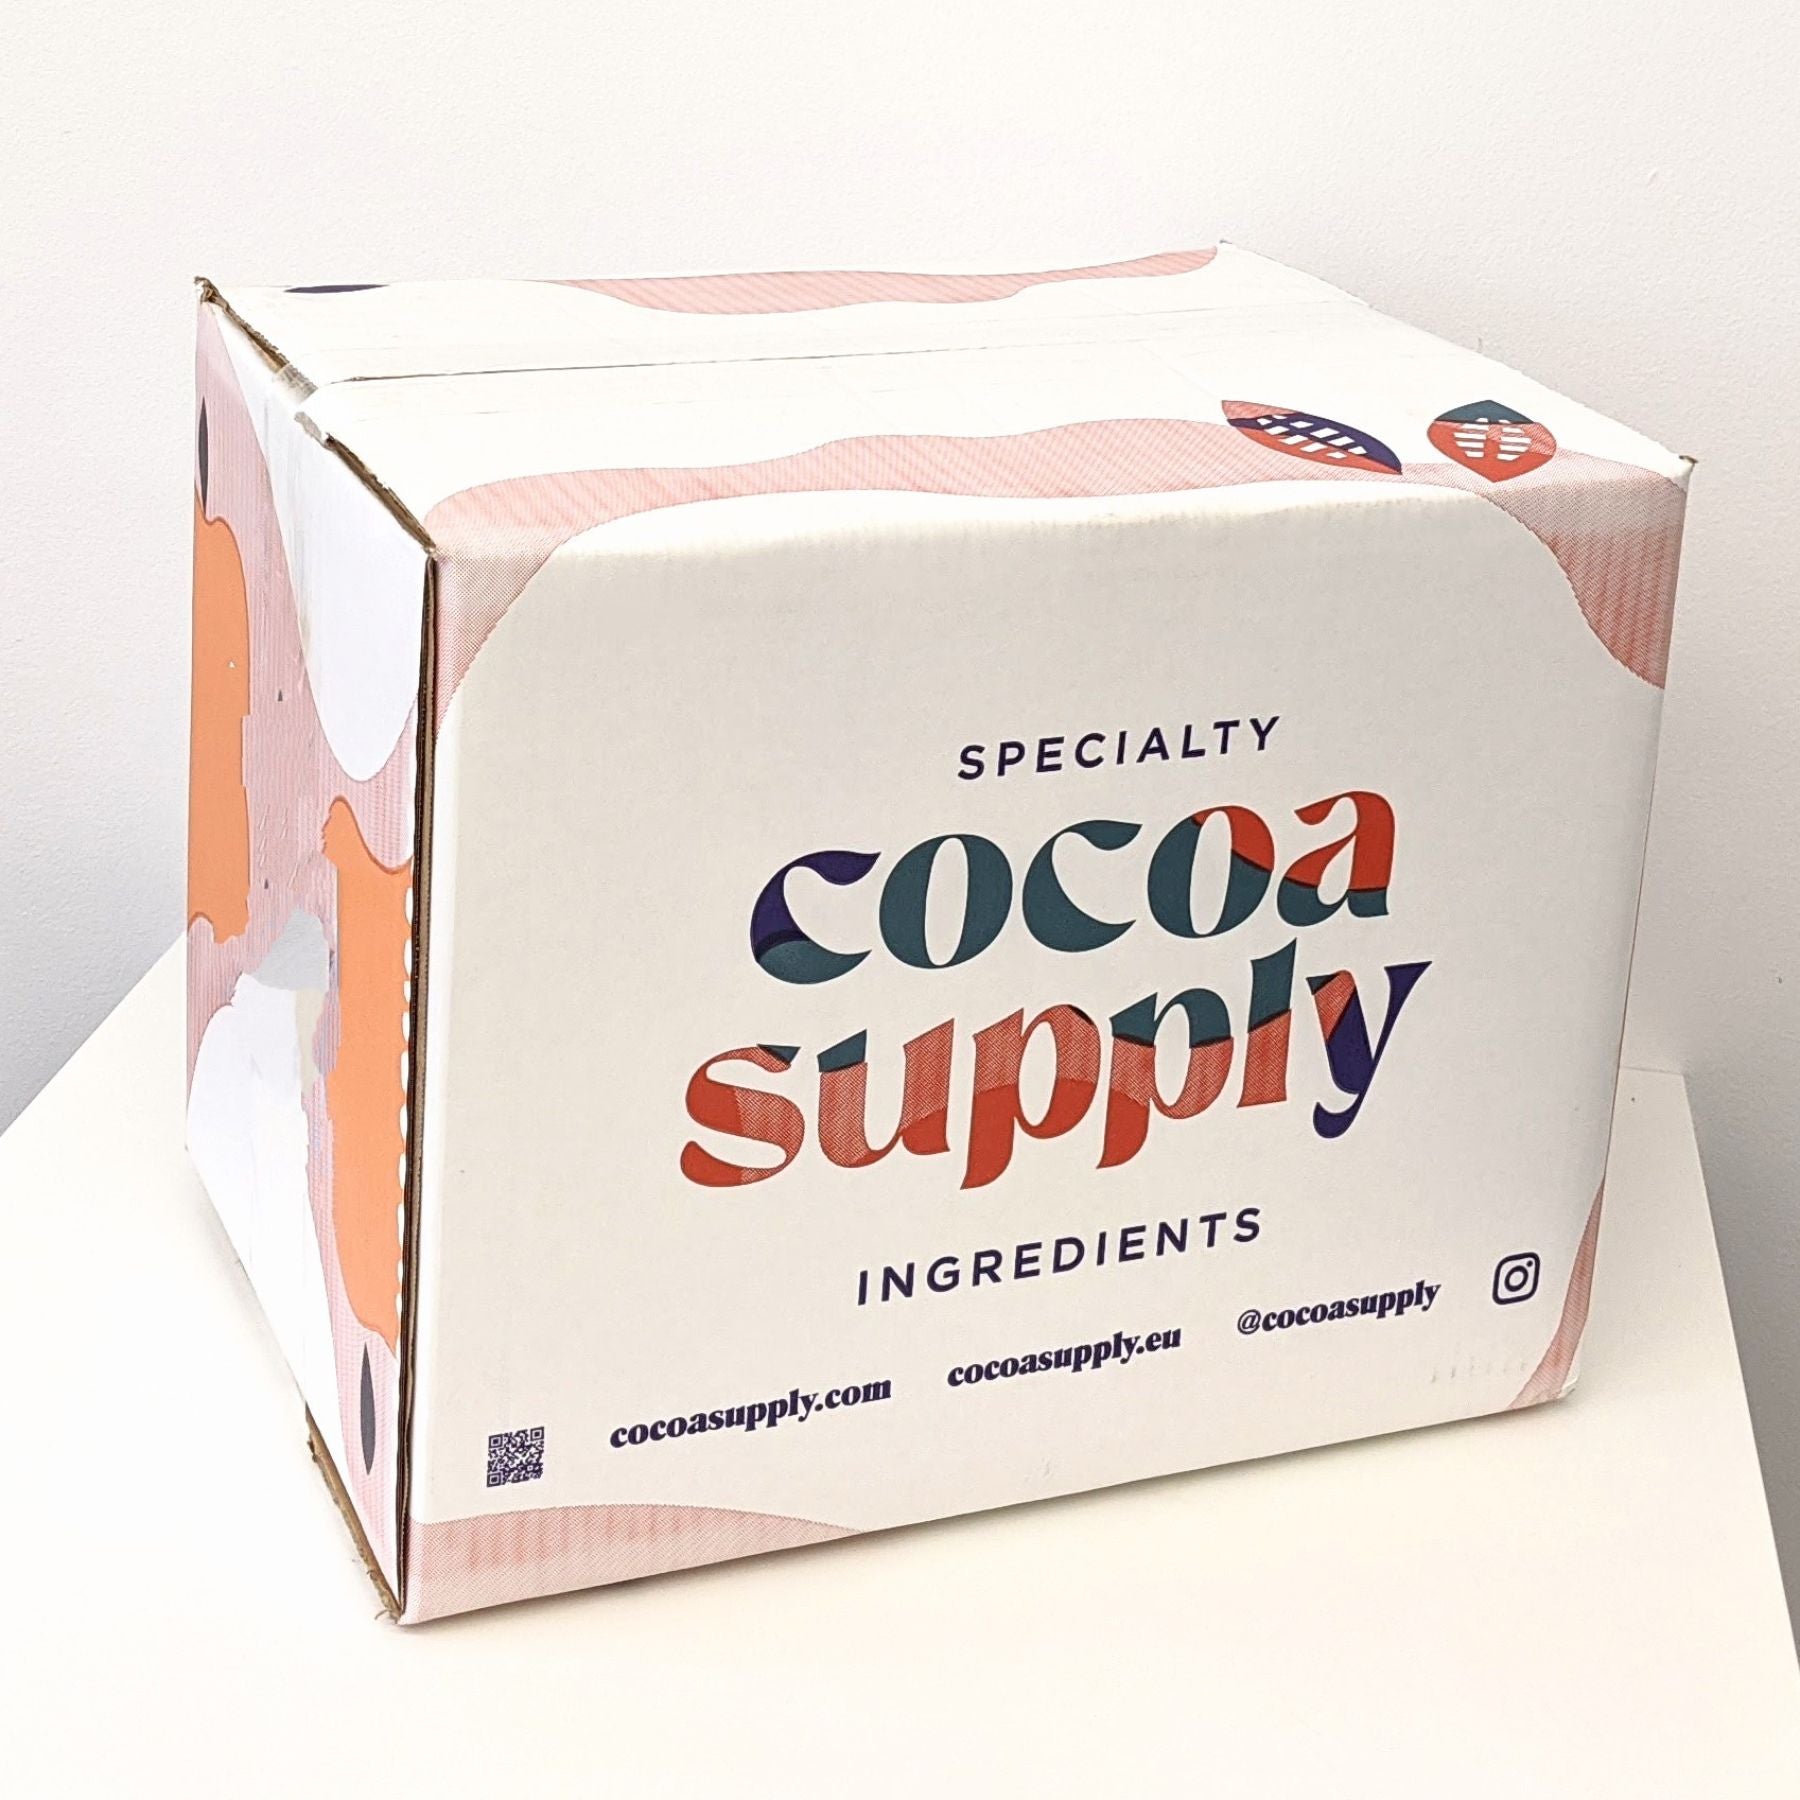 Cocoa Supply Single Origin-Made Products from Ecuador. Box used for Cacao Powder - Dutched Alkalized or Natural, USDA Organic or Conventional, lowfat and high fat content